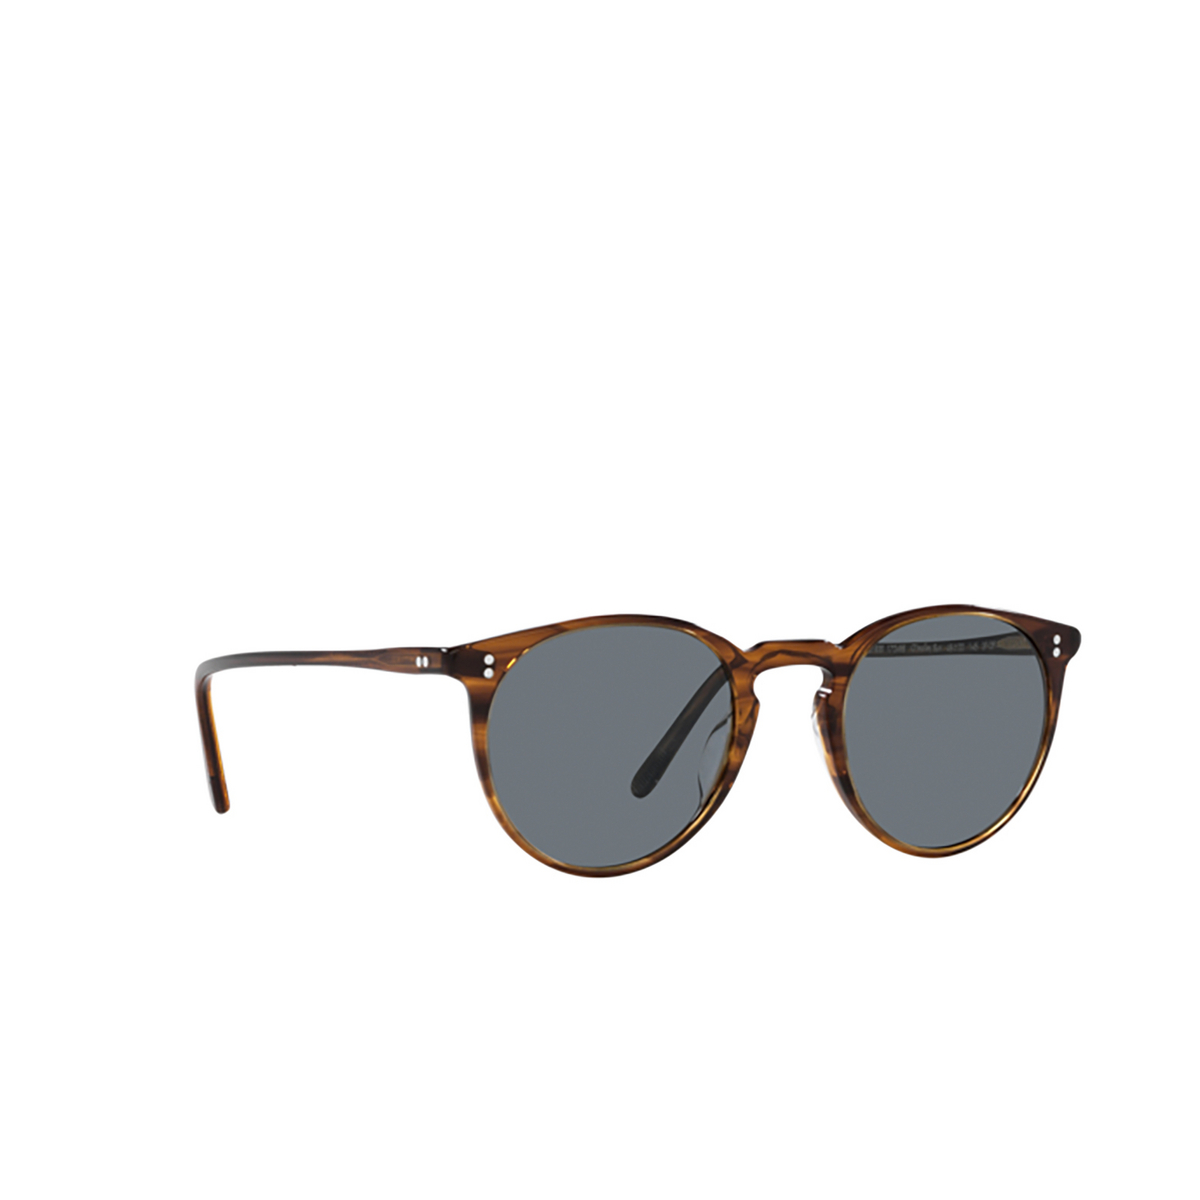 Oliver Peoples O'MALLEY Sunglasses 1724R8 Tuscany Tortoise - three-quarters view